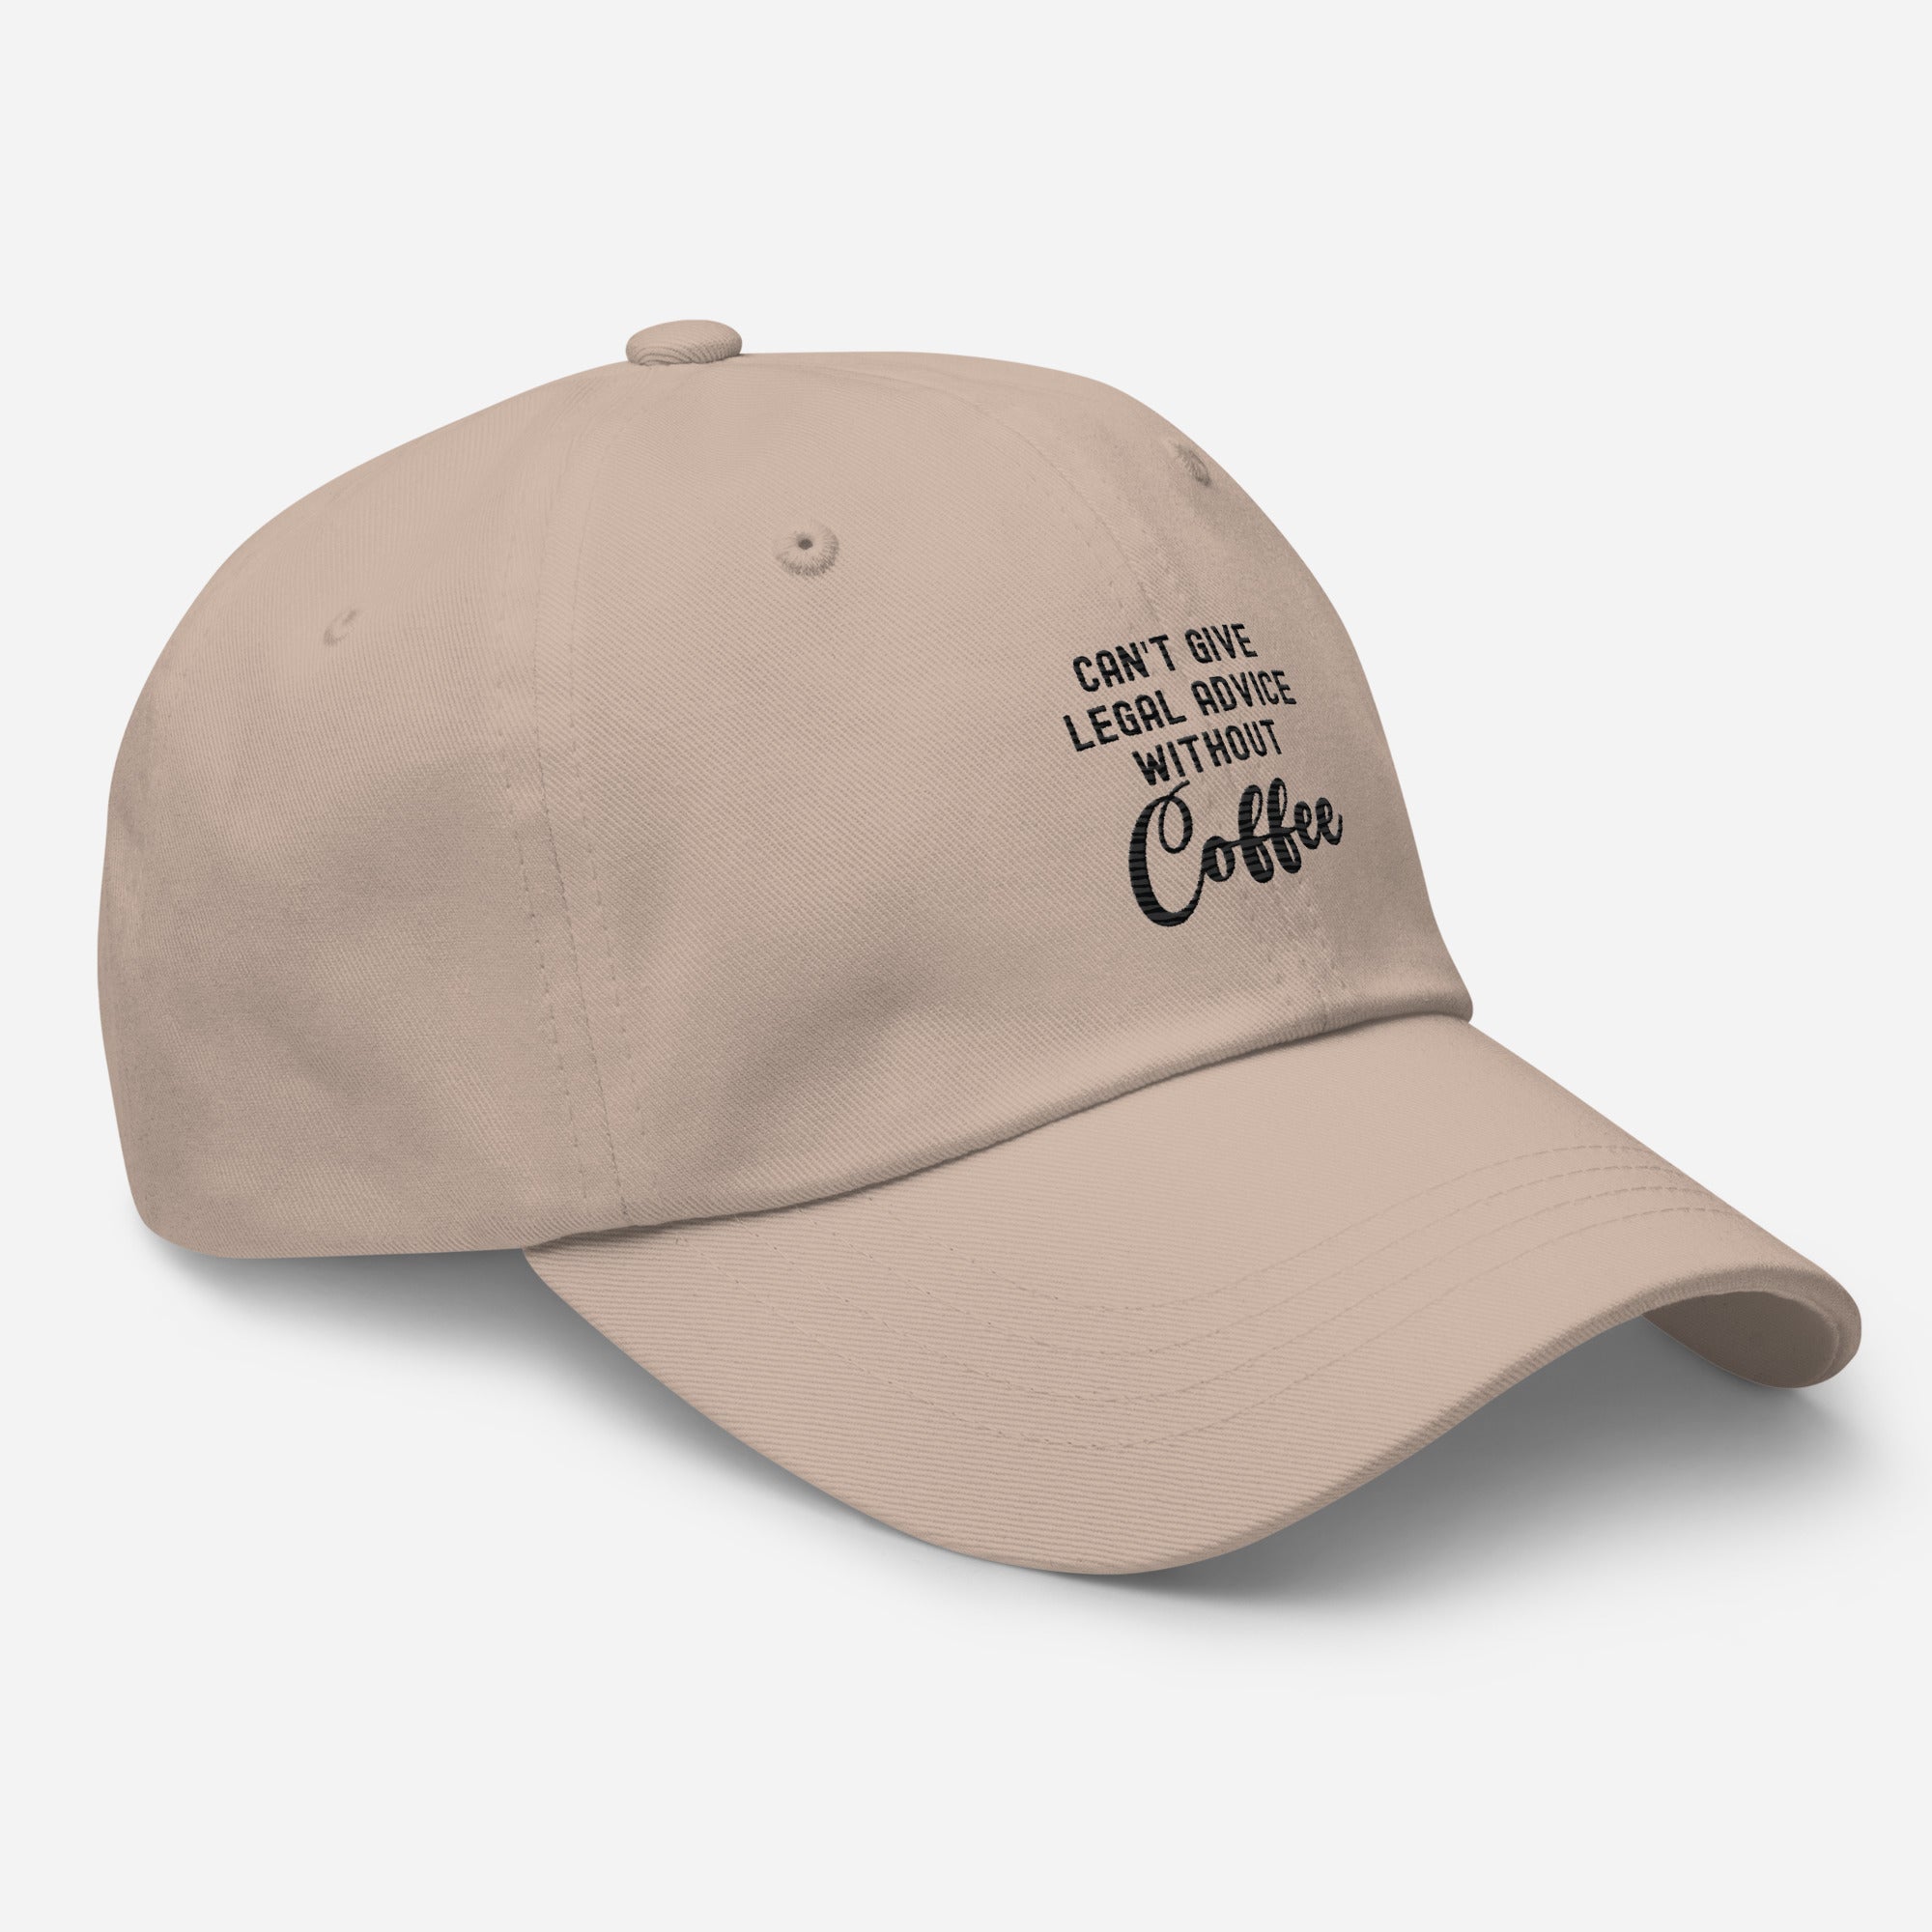 Hat | Can’t give legal advice without coffee